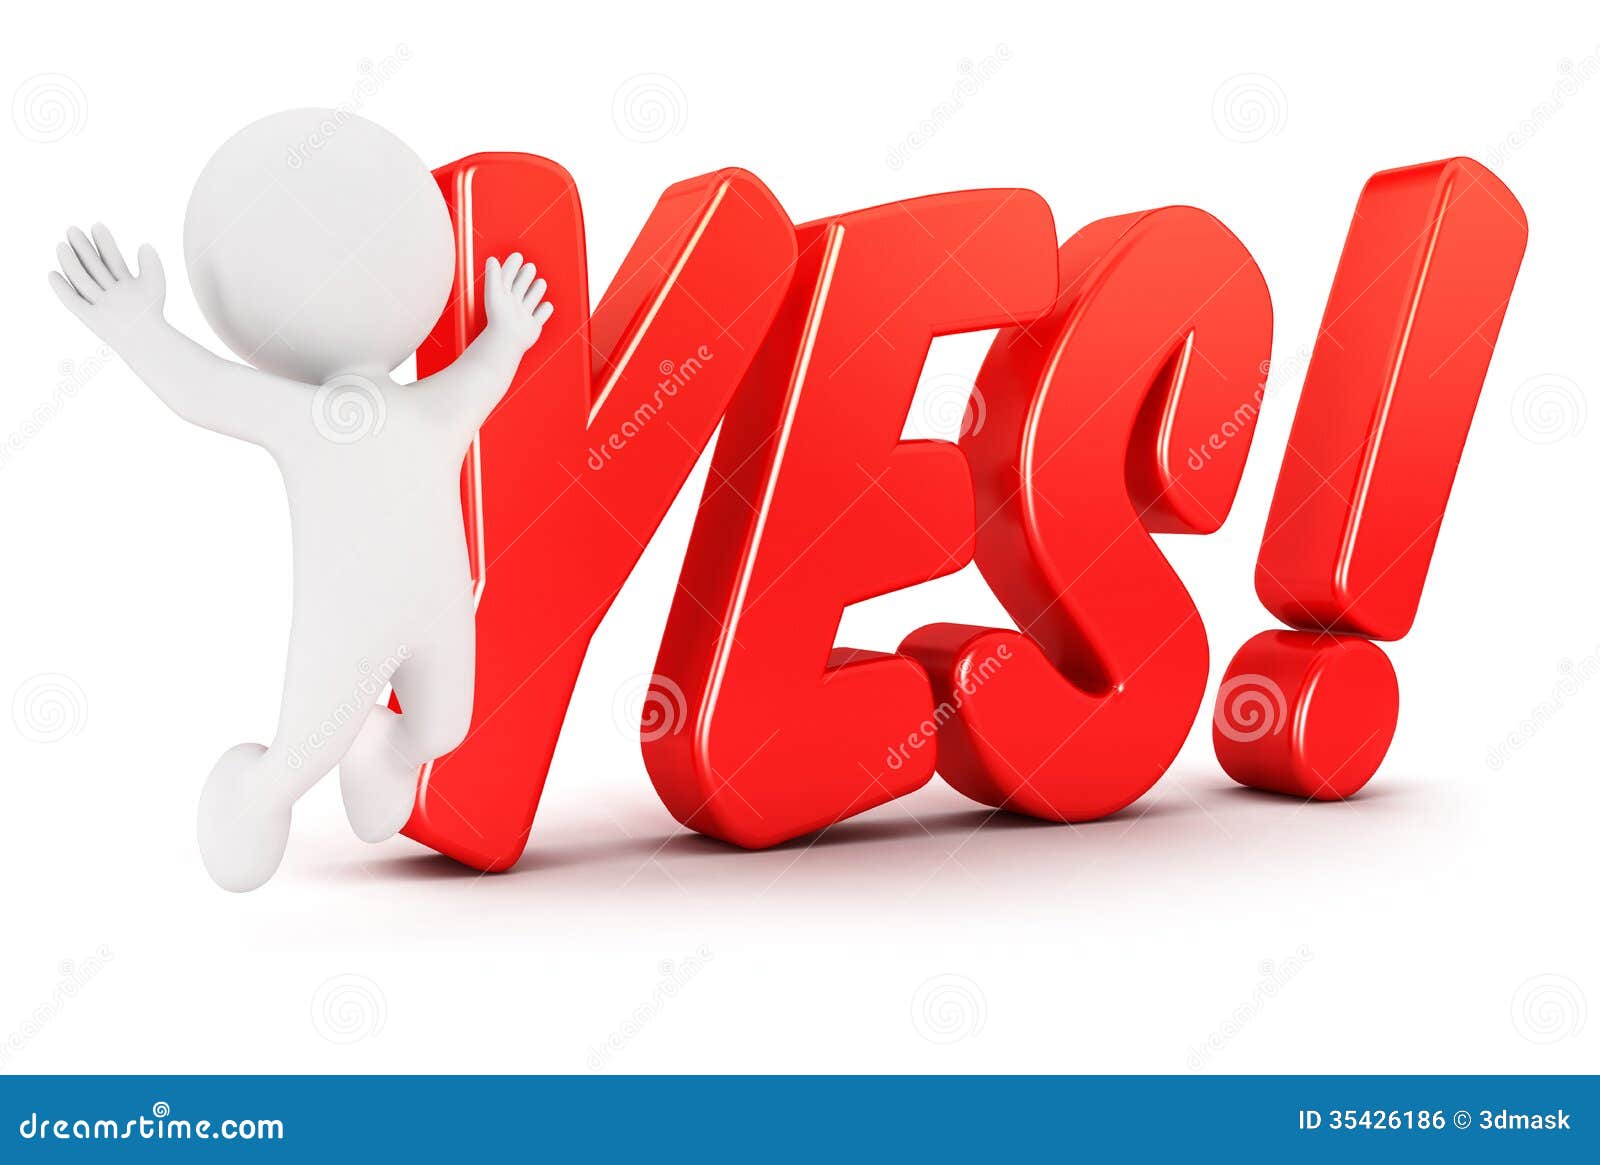 yes clipart free - photo #23